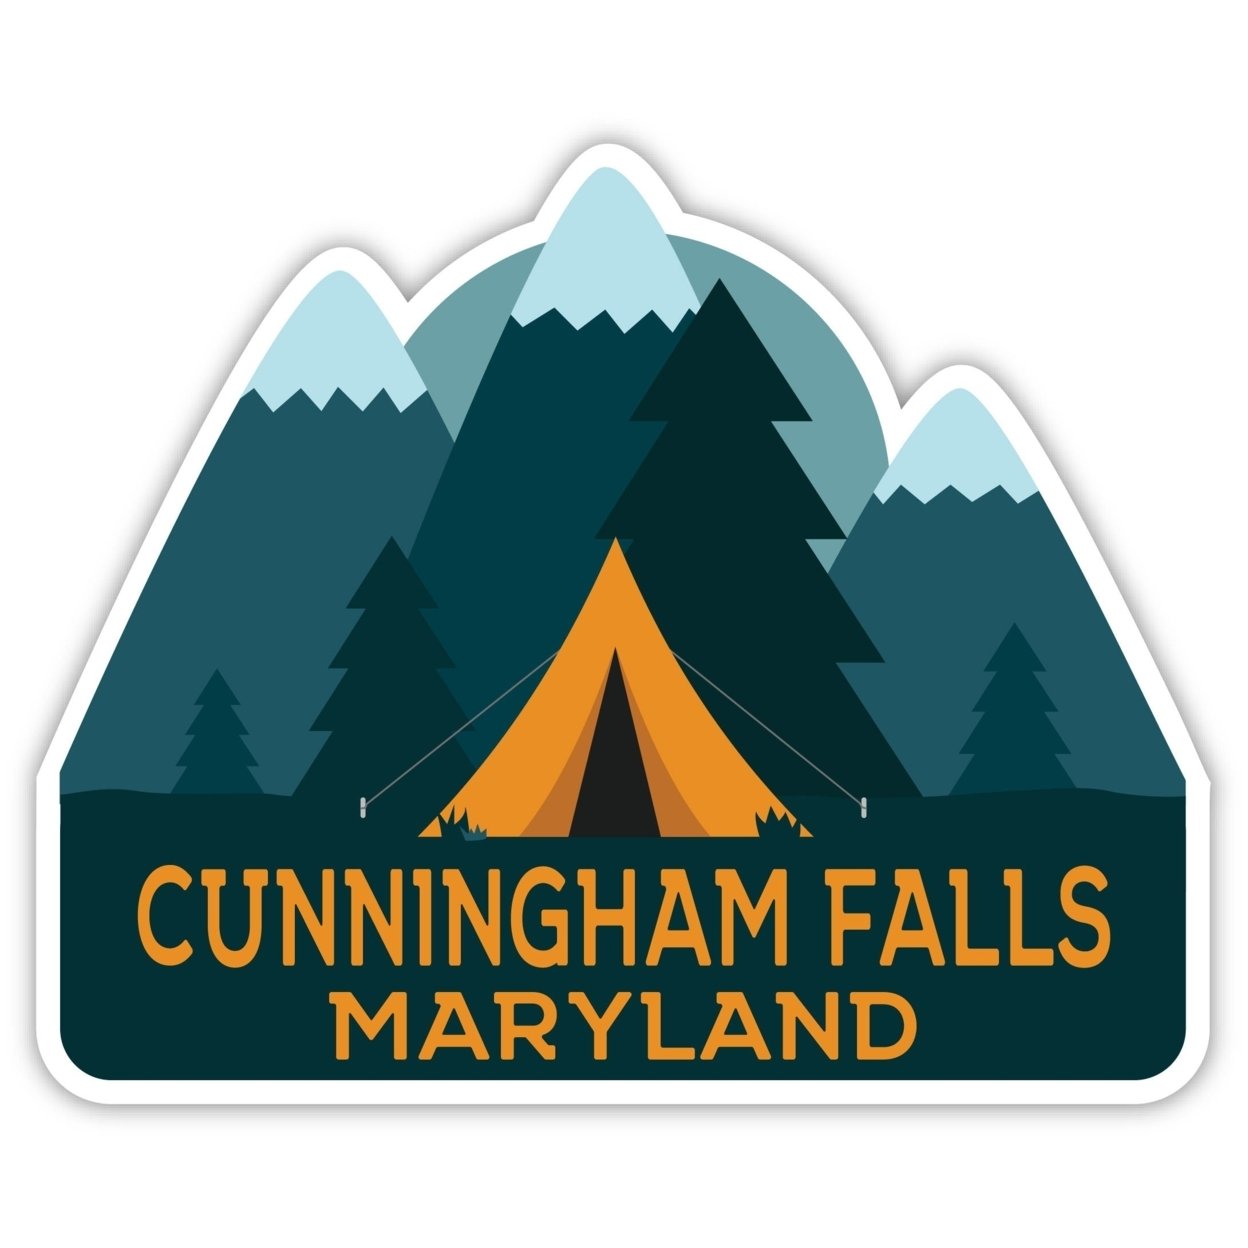 Cunningham Falls Maryland Souvenir Decorative Stickers (Choose Theme And Size) - Single Unit, 12-Inch, Tent